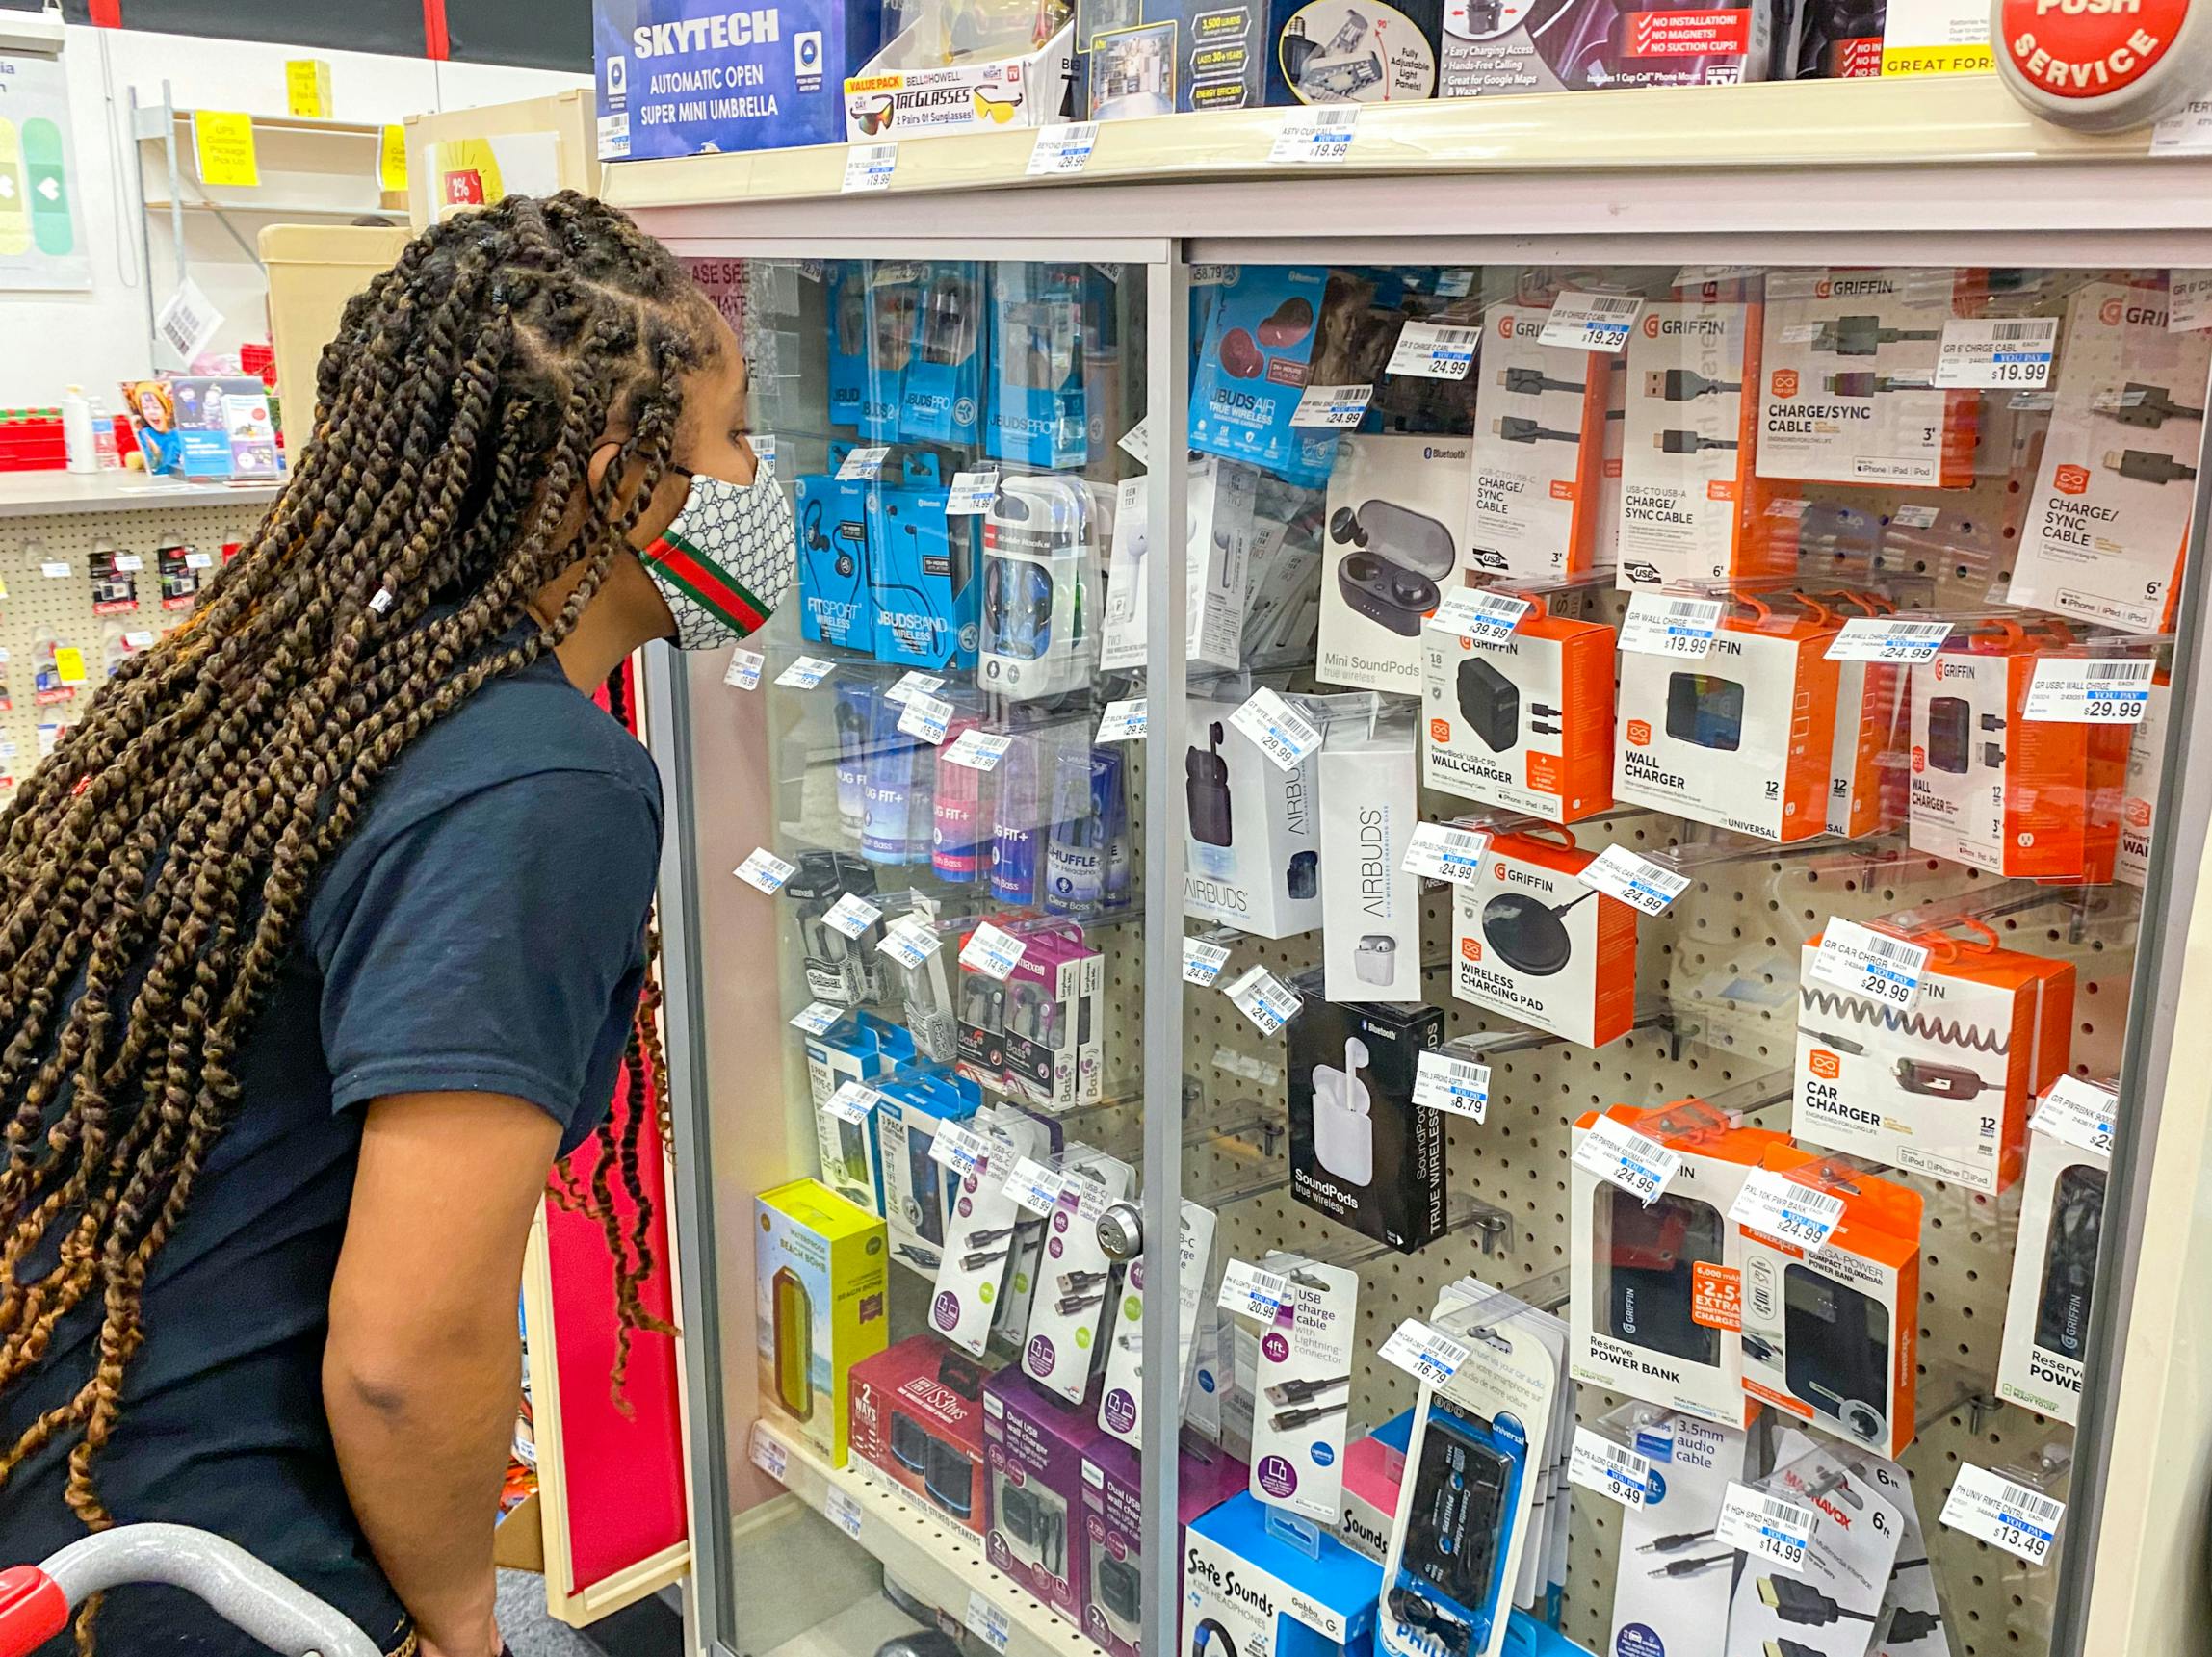 A person looking into the electronics case inside CVS.